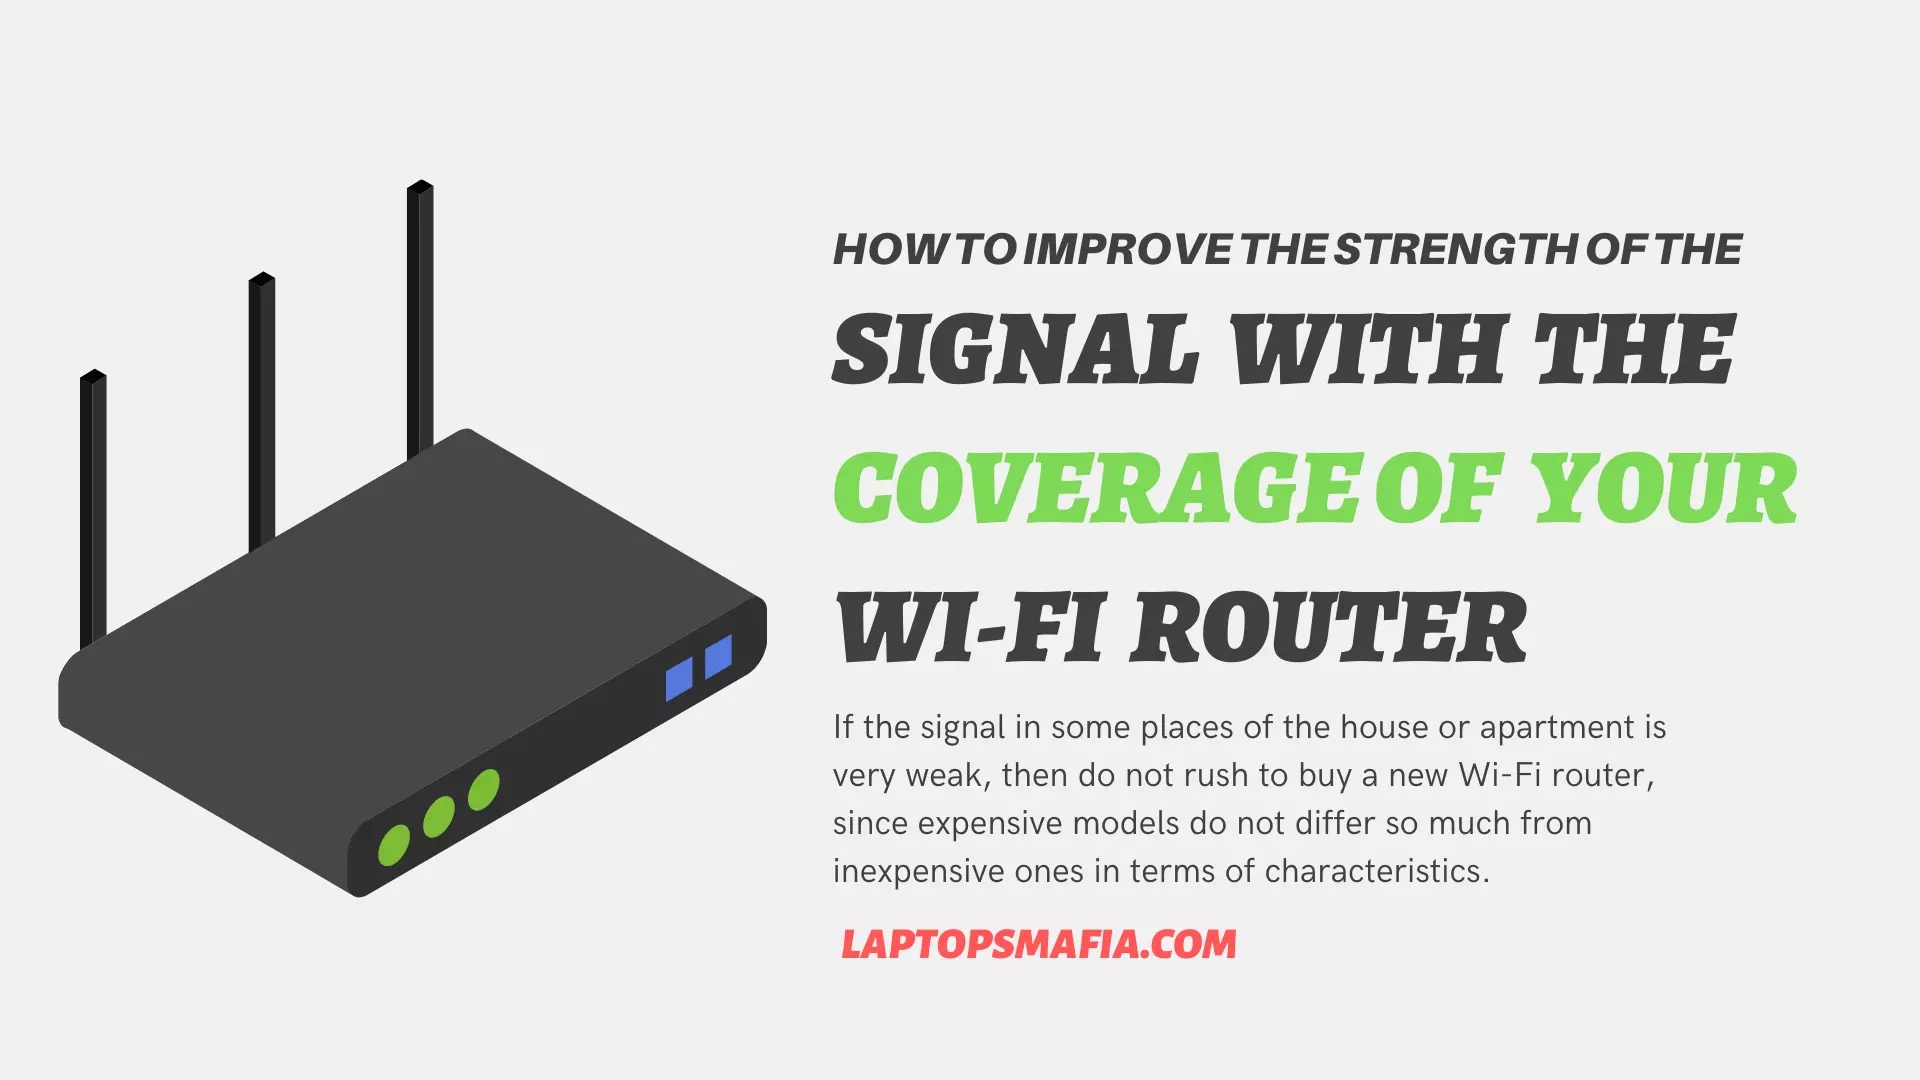 How to improve the strength of the Signal with the Coverage of your Wi-Fi Router